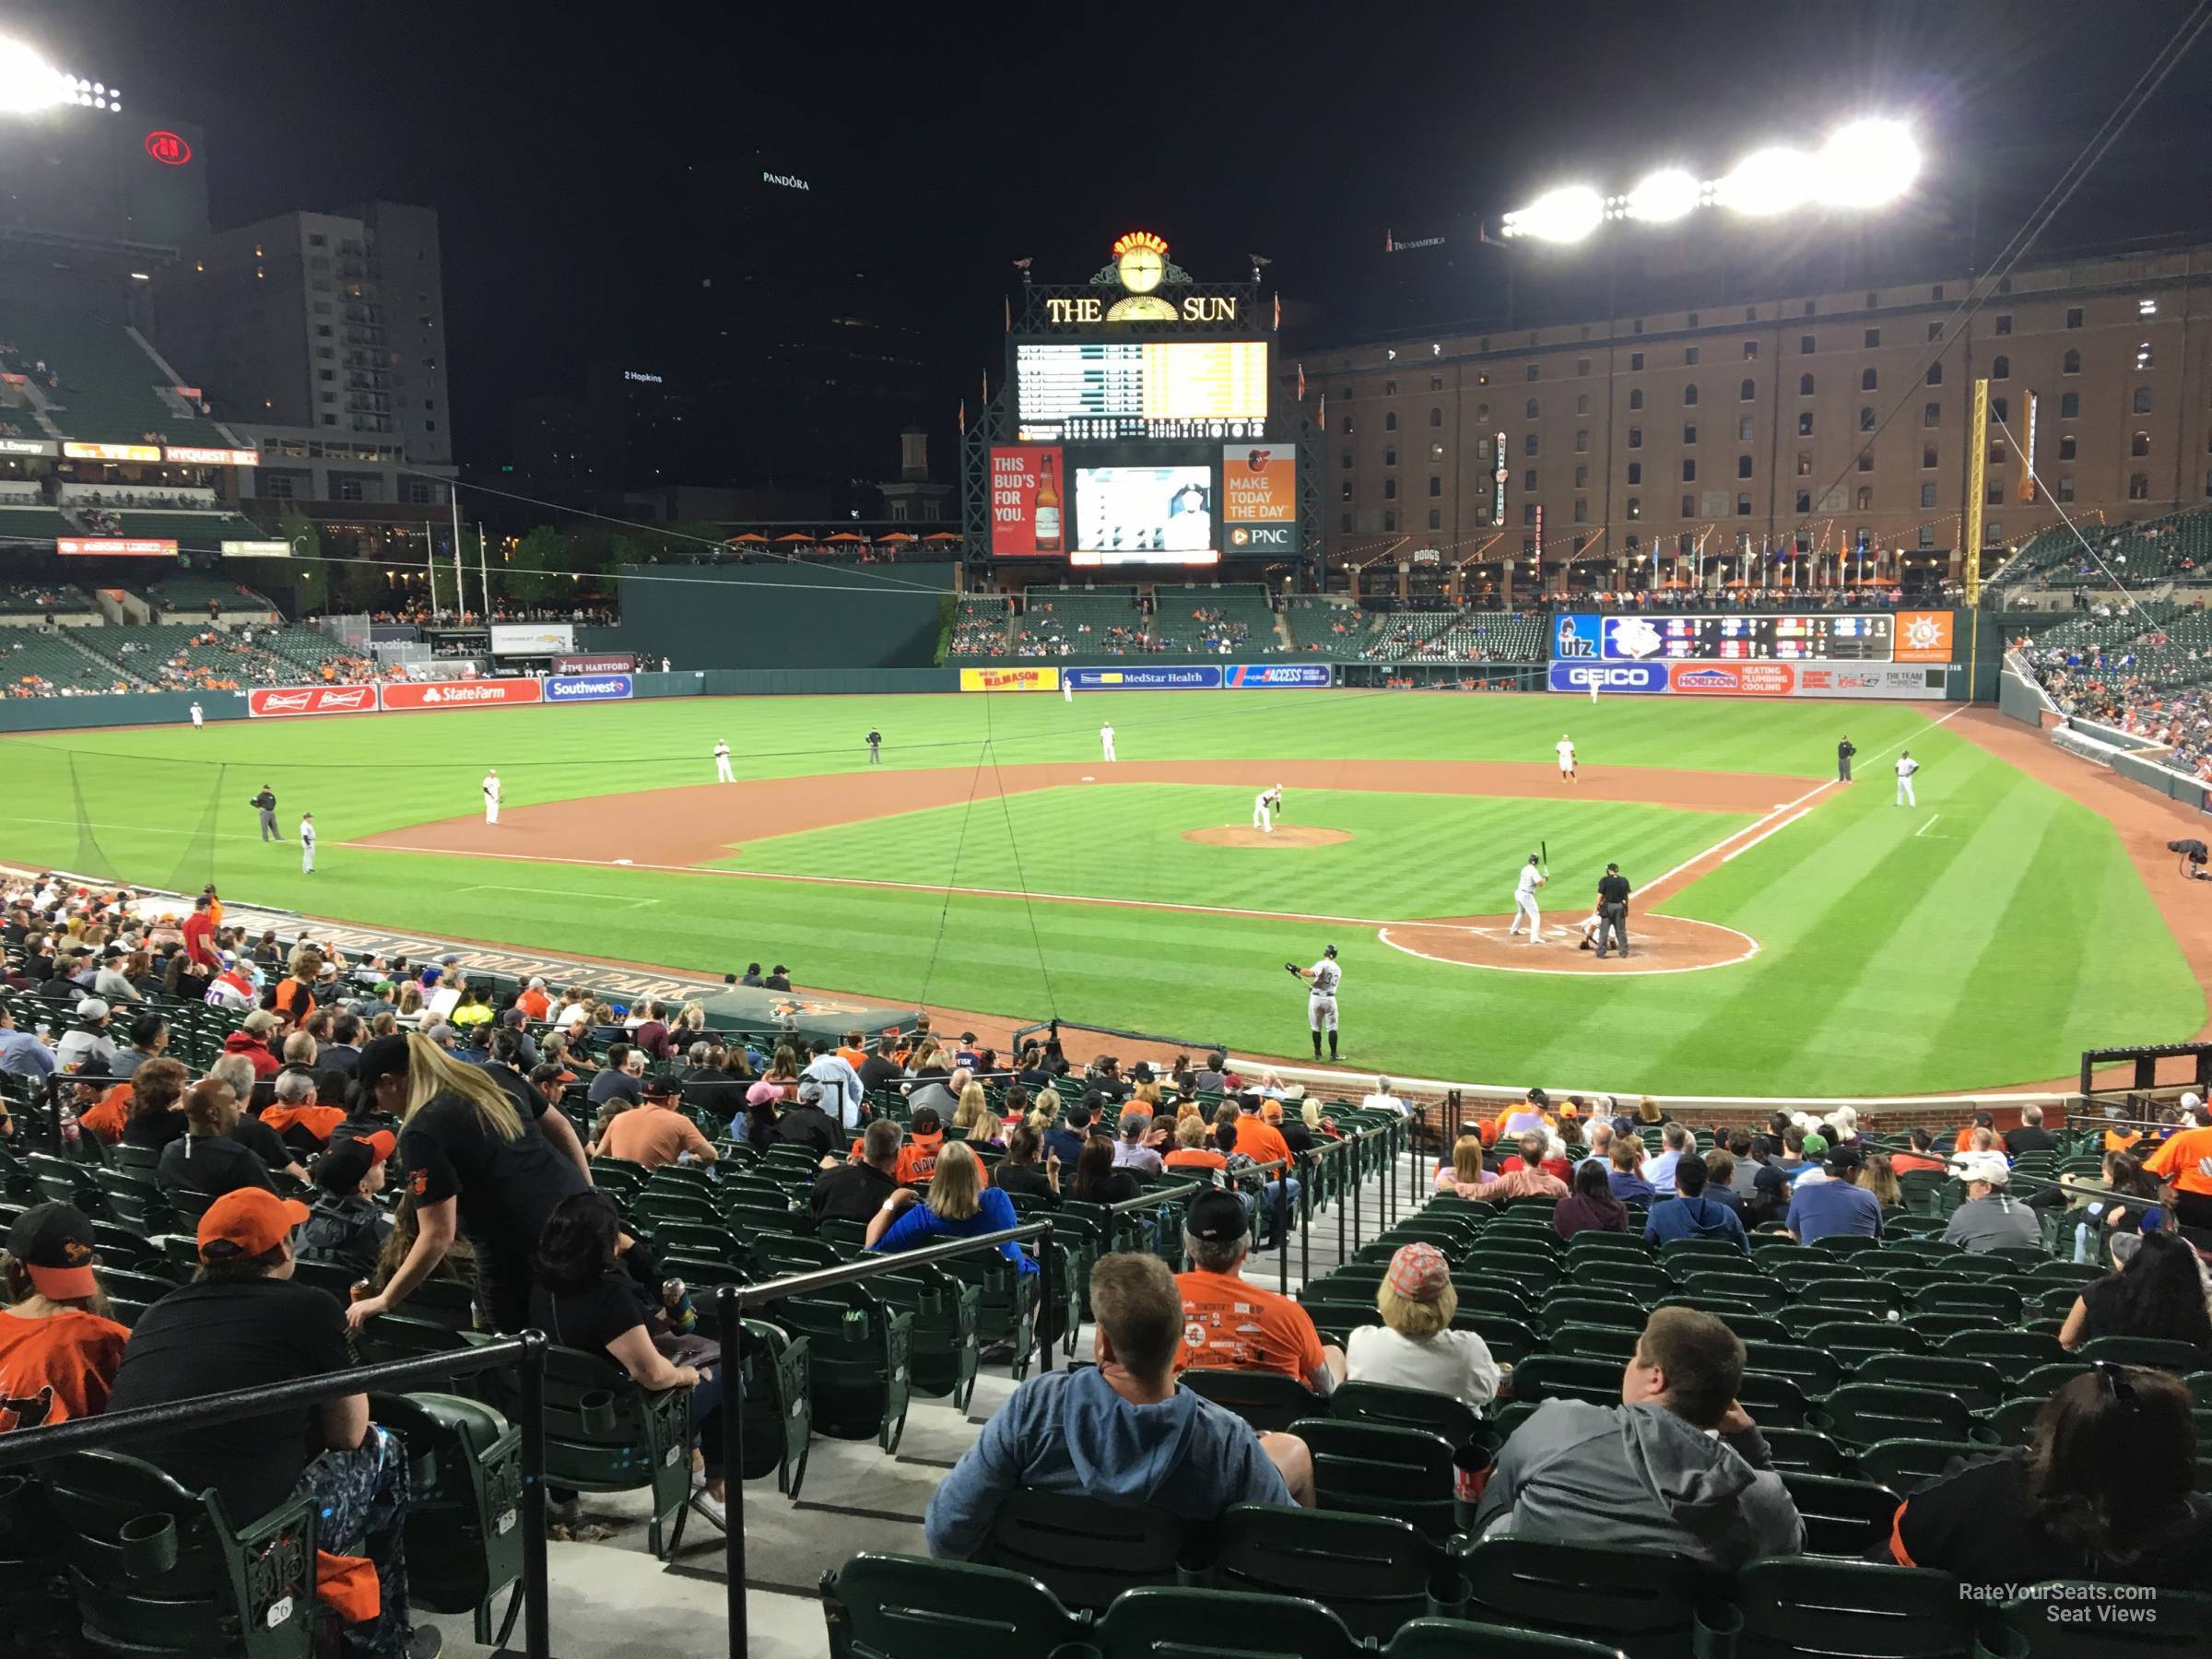 section 44, row 27 seat view  - oriole park